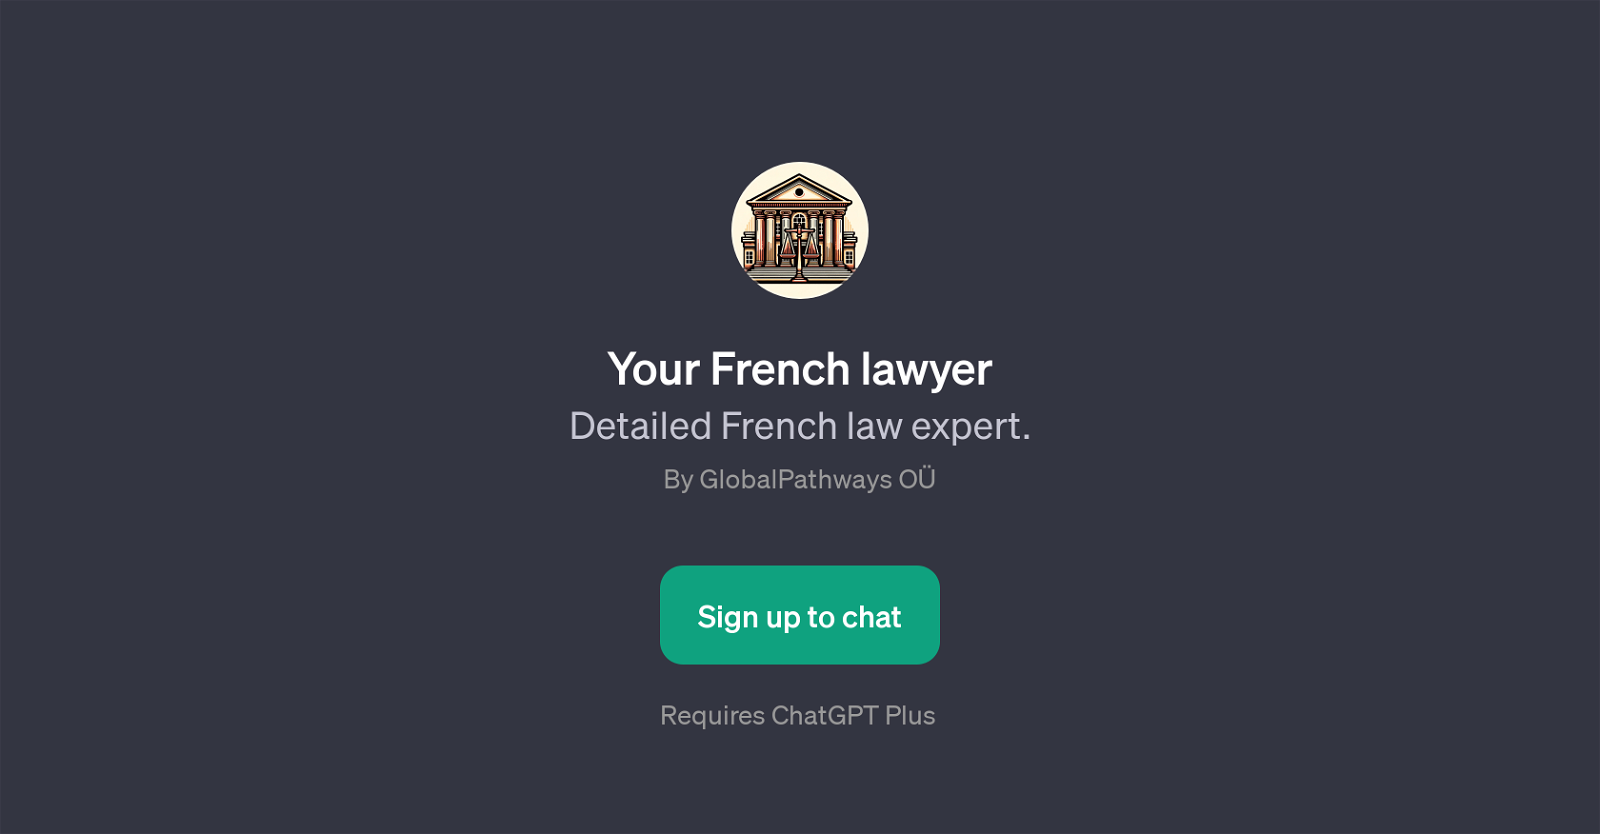 Your French Lawyer website